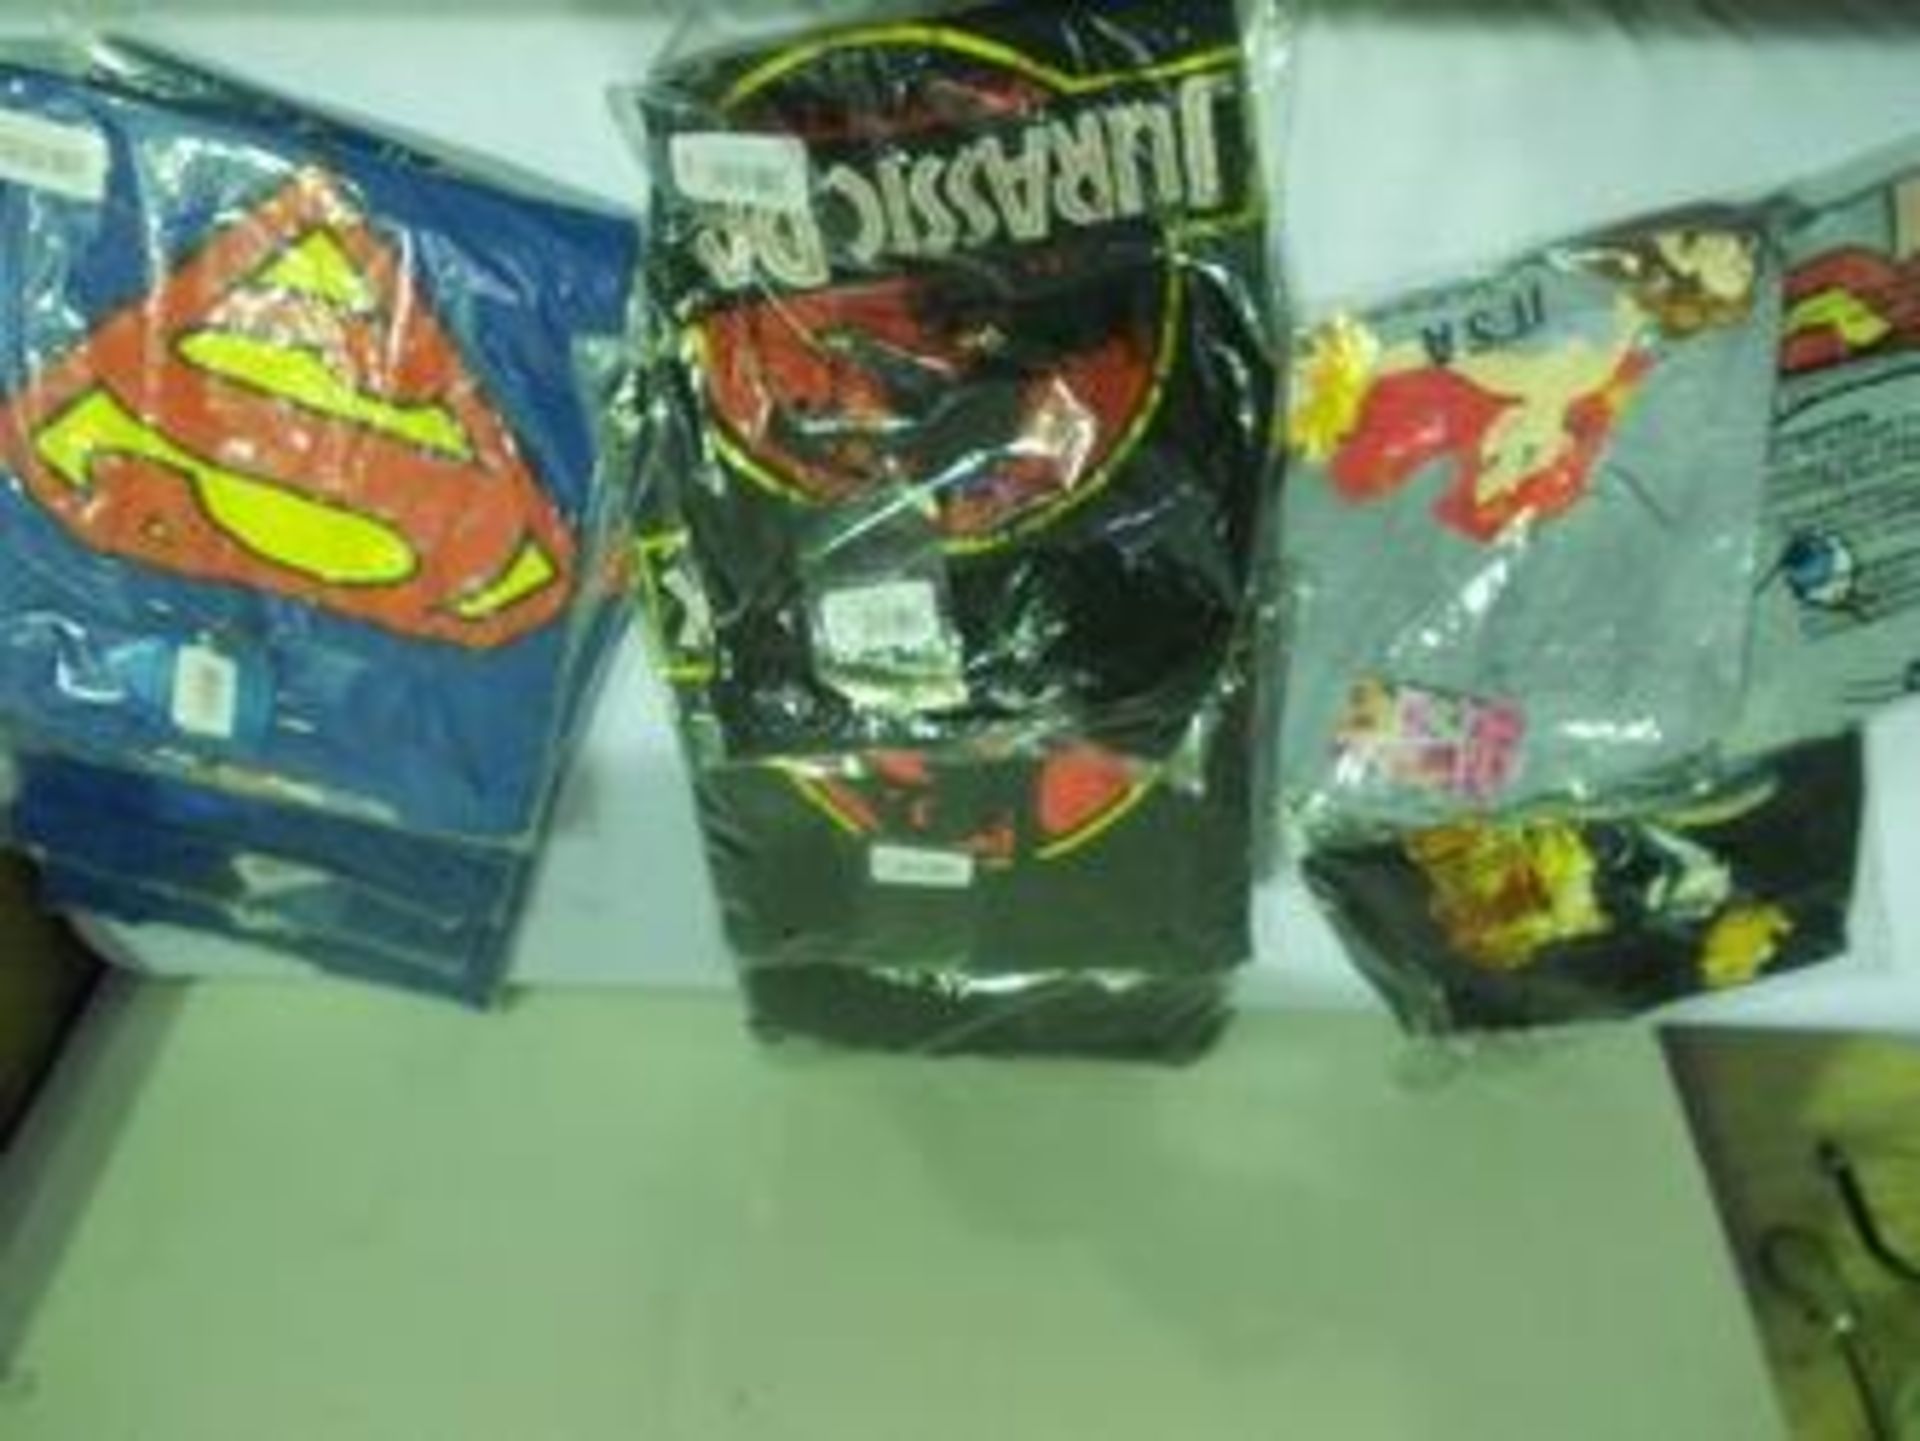 12 x items of Superman, Jurassic Park and Disney Official Merchandising clothing in various sizes,